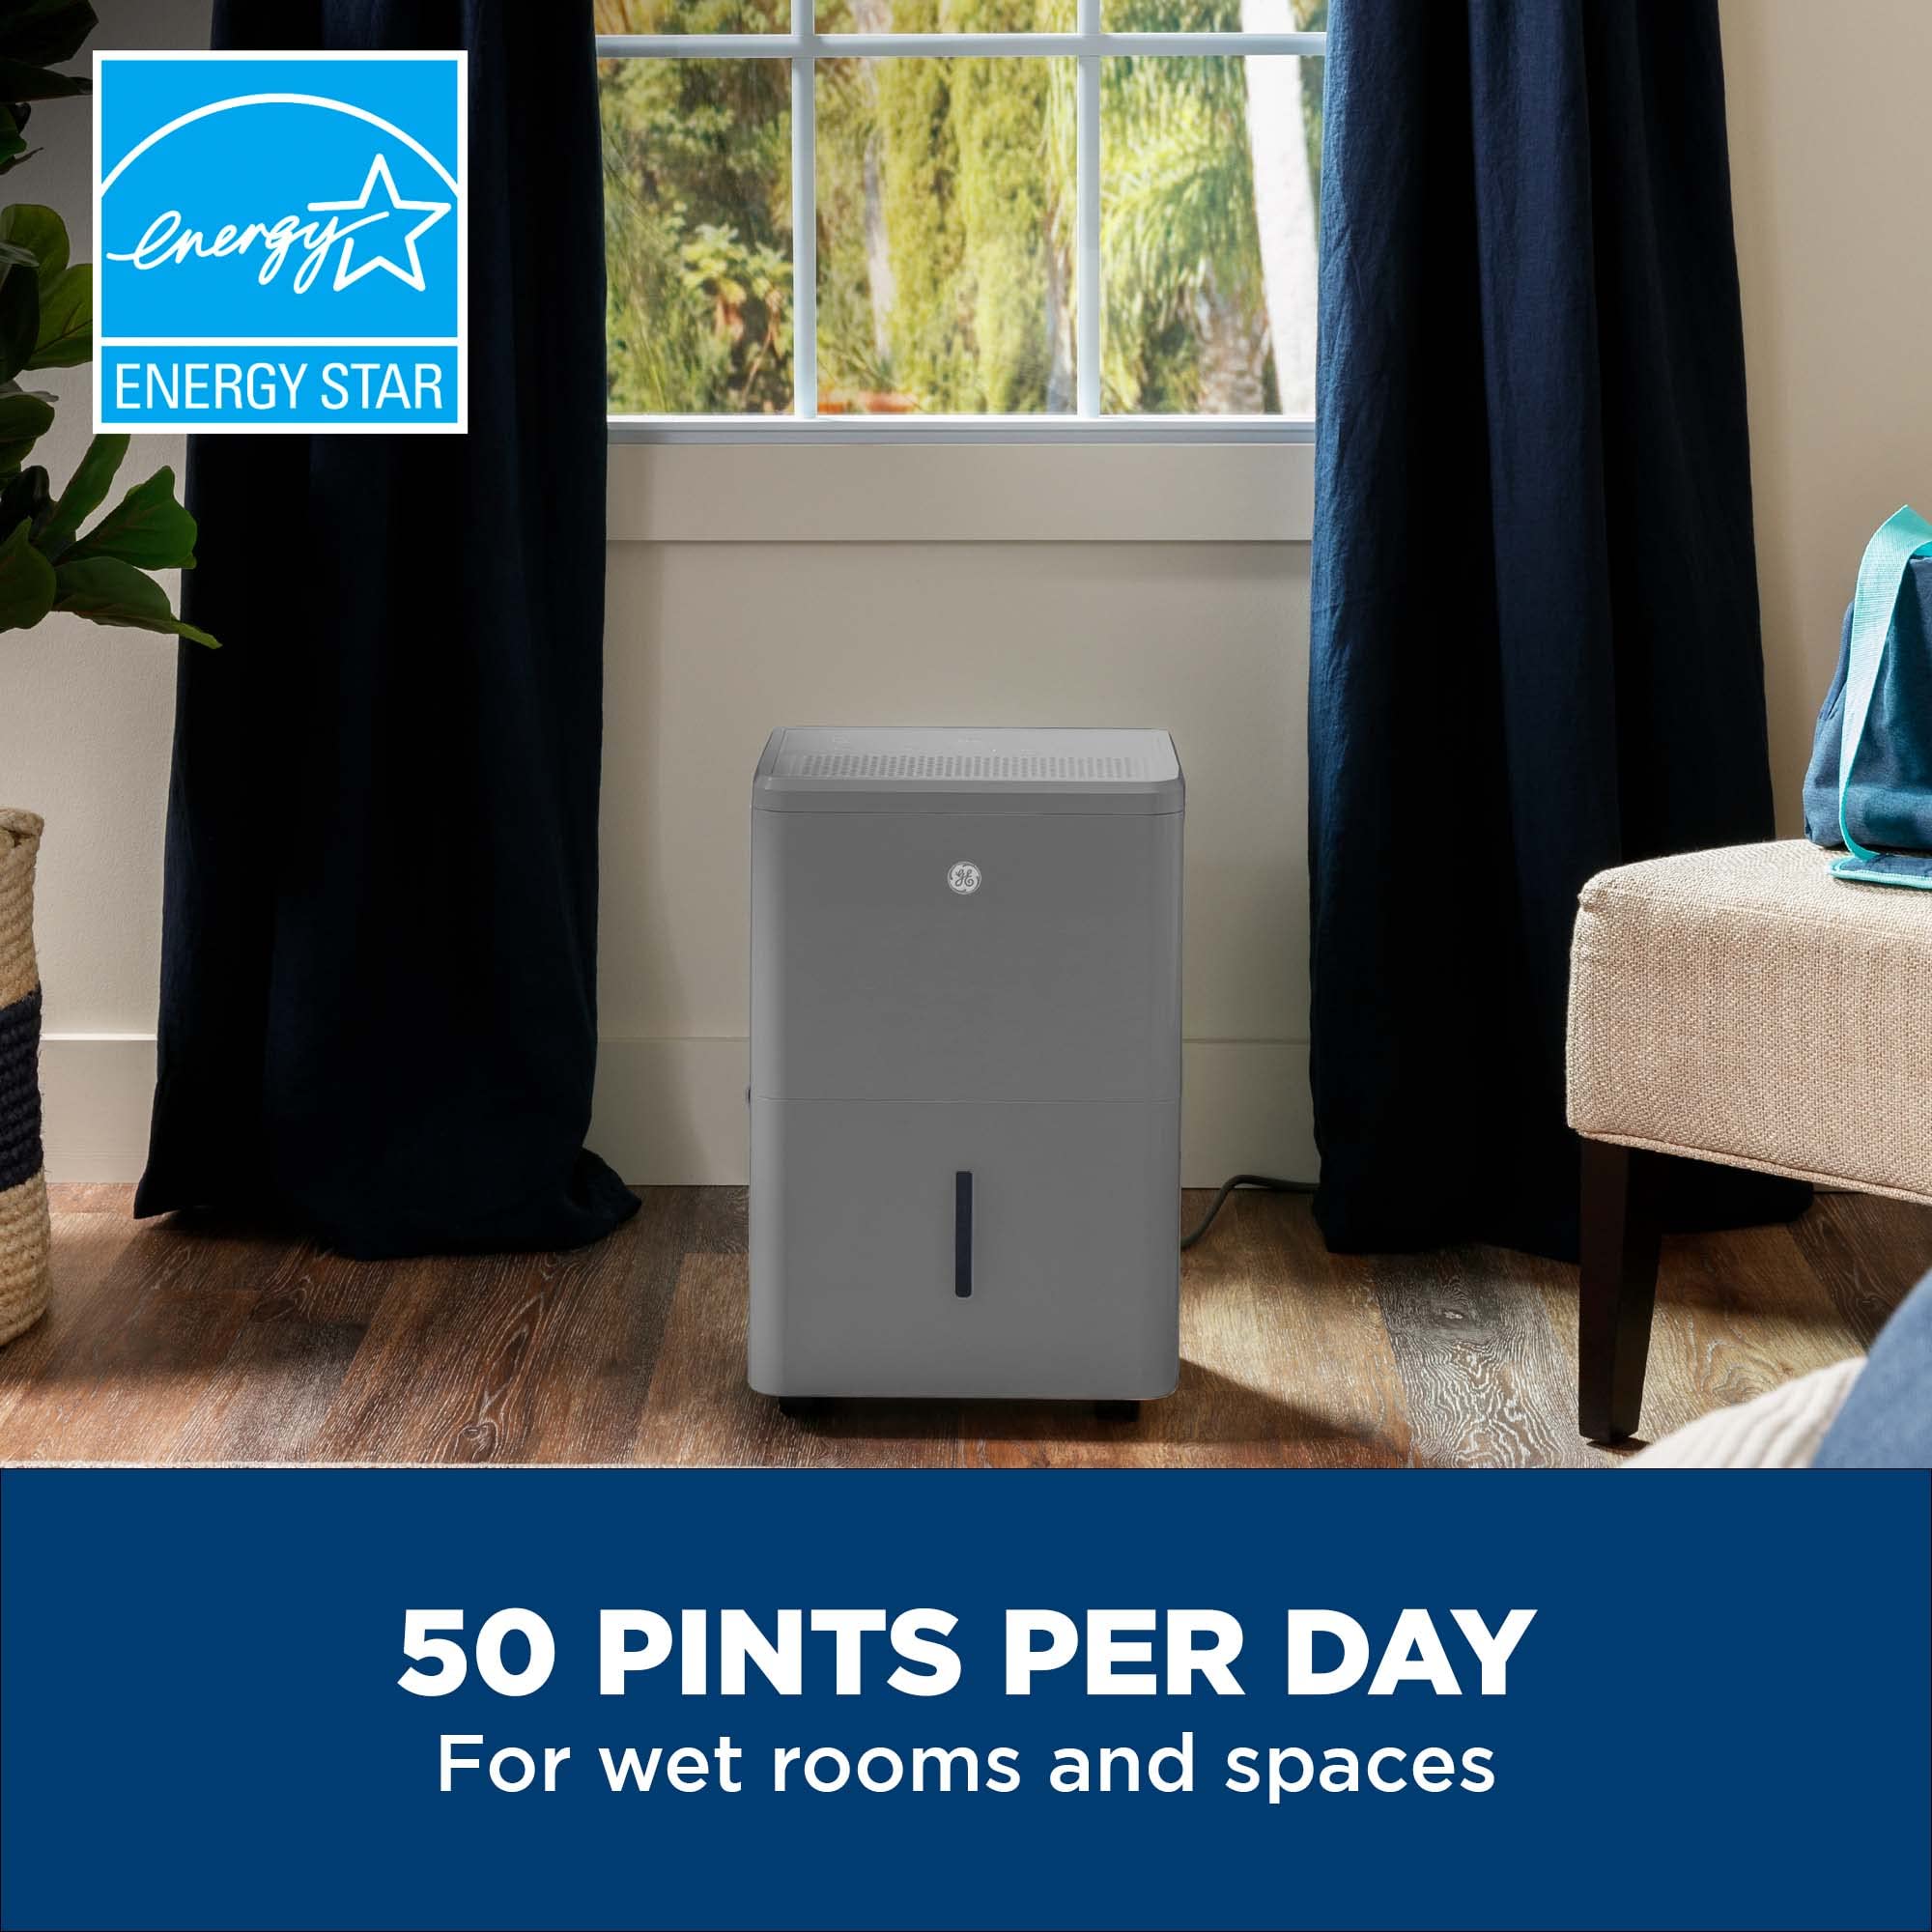 GE Energy Star Portable Dehumidifier for Basement, Bedroom, Bathroom, Garage or Large Rooms up to 4500 Sq Ft, 50 Pint with Removable Bucket and Continuous Drain Connect for Auto or Manual Drainage